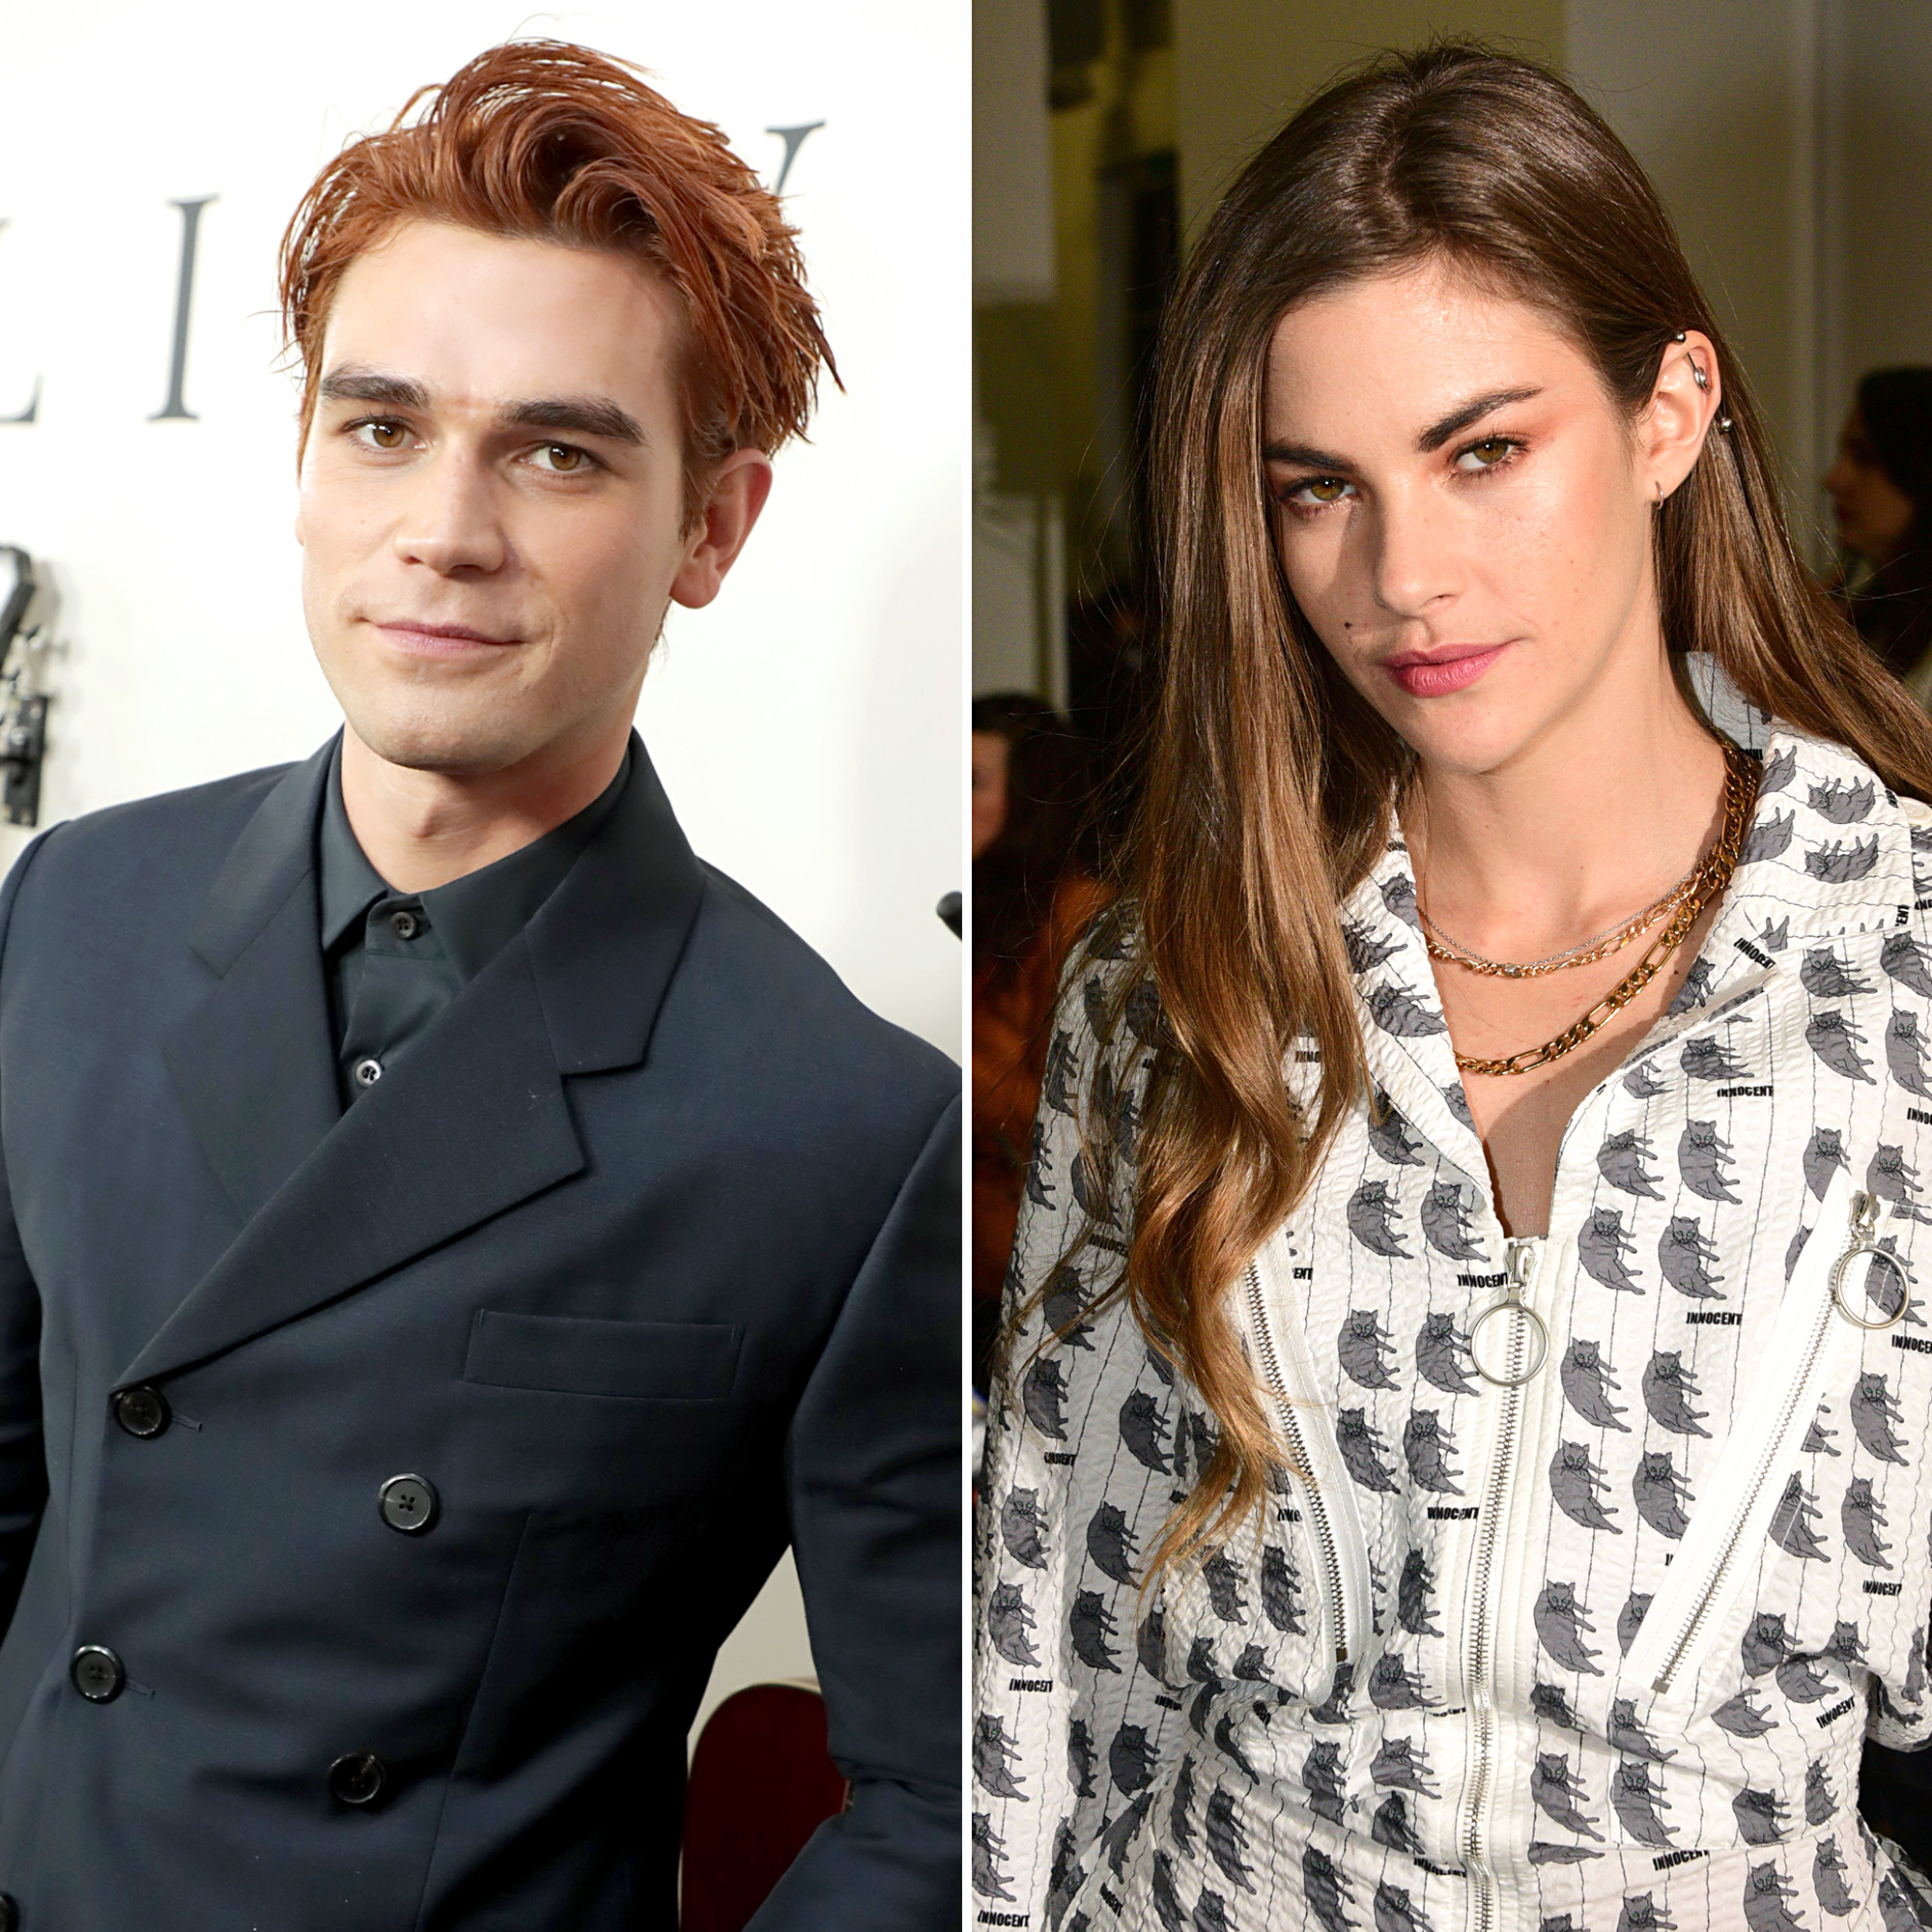 French Nude Beach Couples - KJ Apa Takes Nude Photos of Clara Berry, She Declares Love for Him